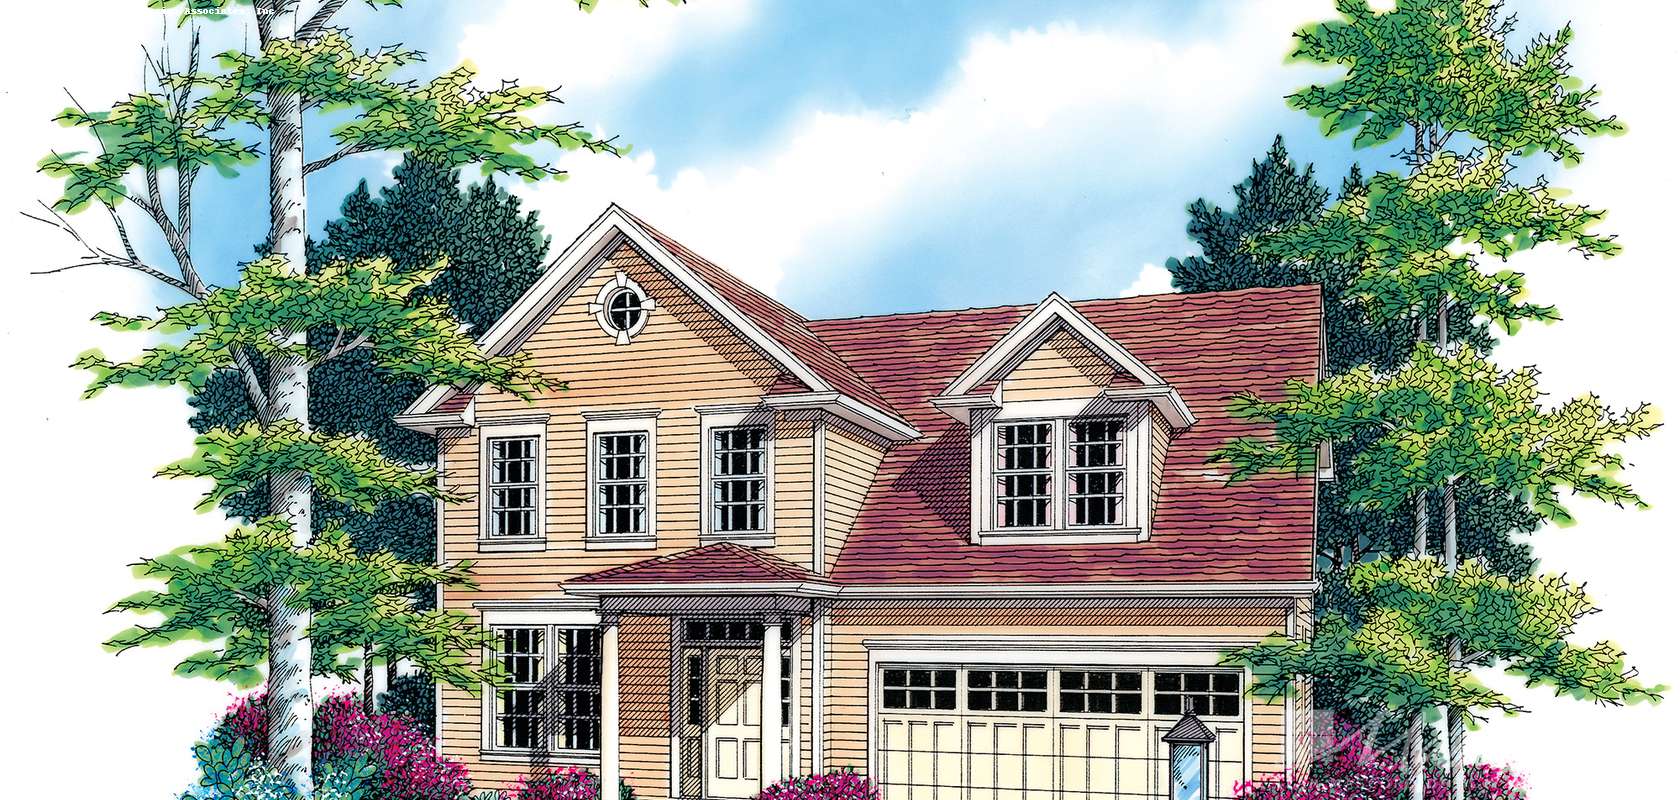 Cape Cod House Plan 2187 The Charlemont 1877 Sqft 4 Beds